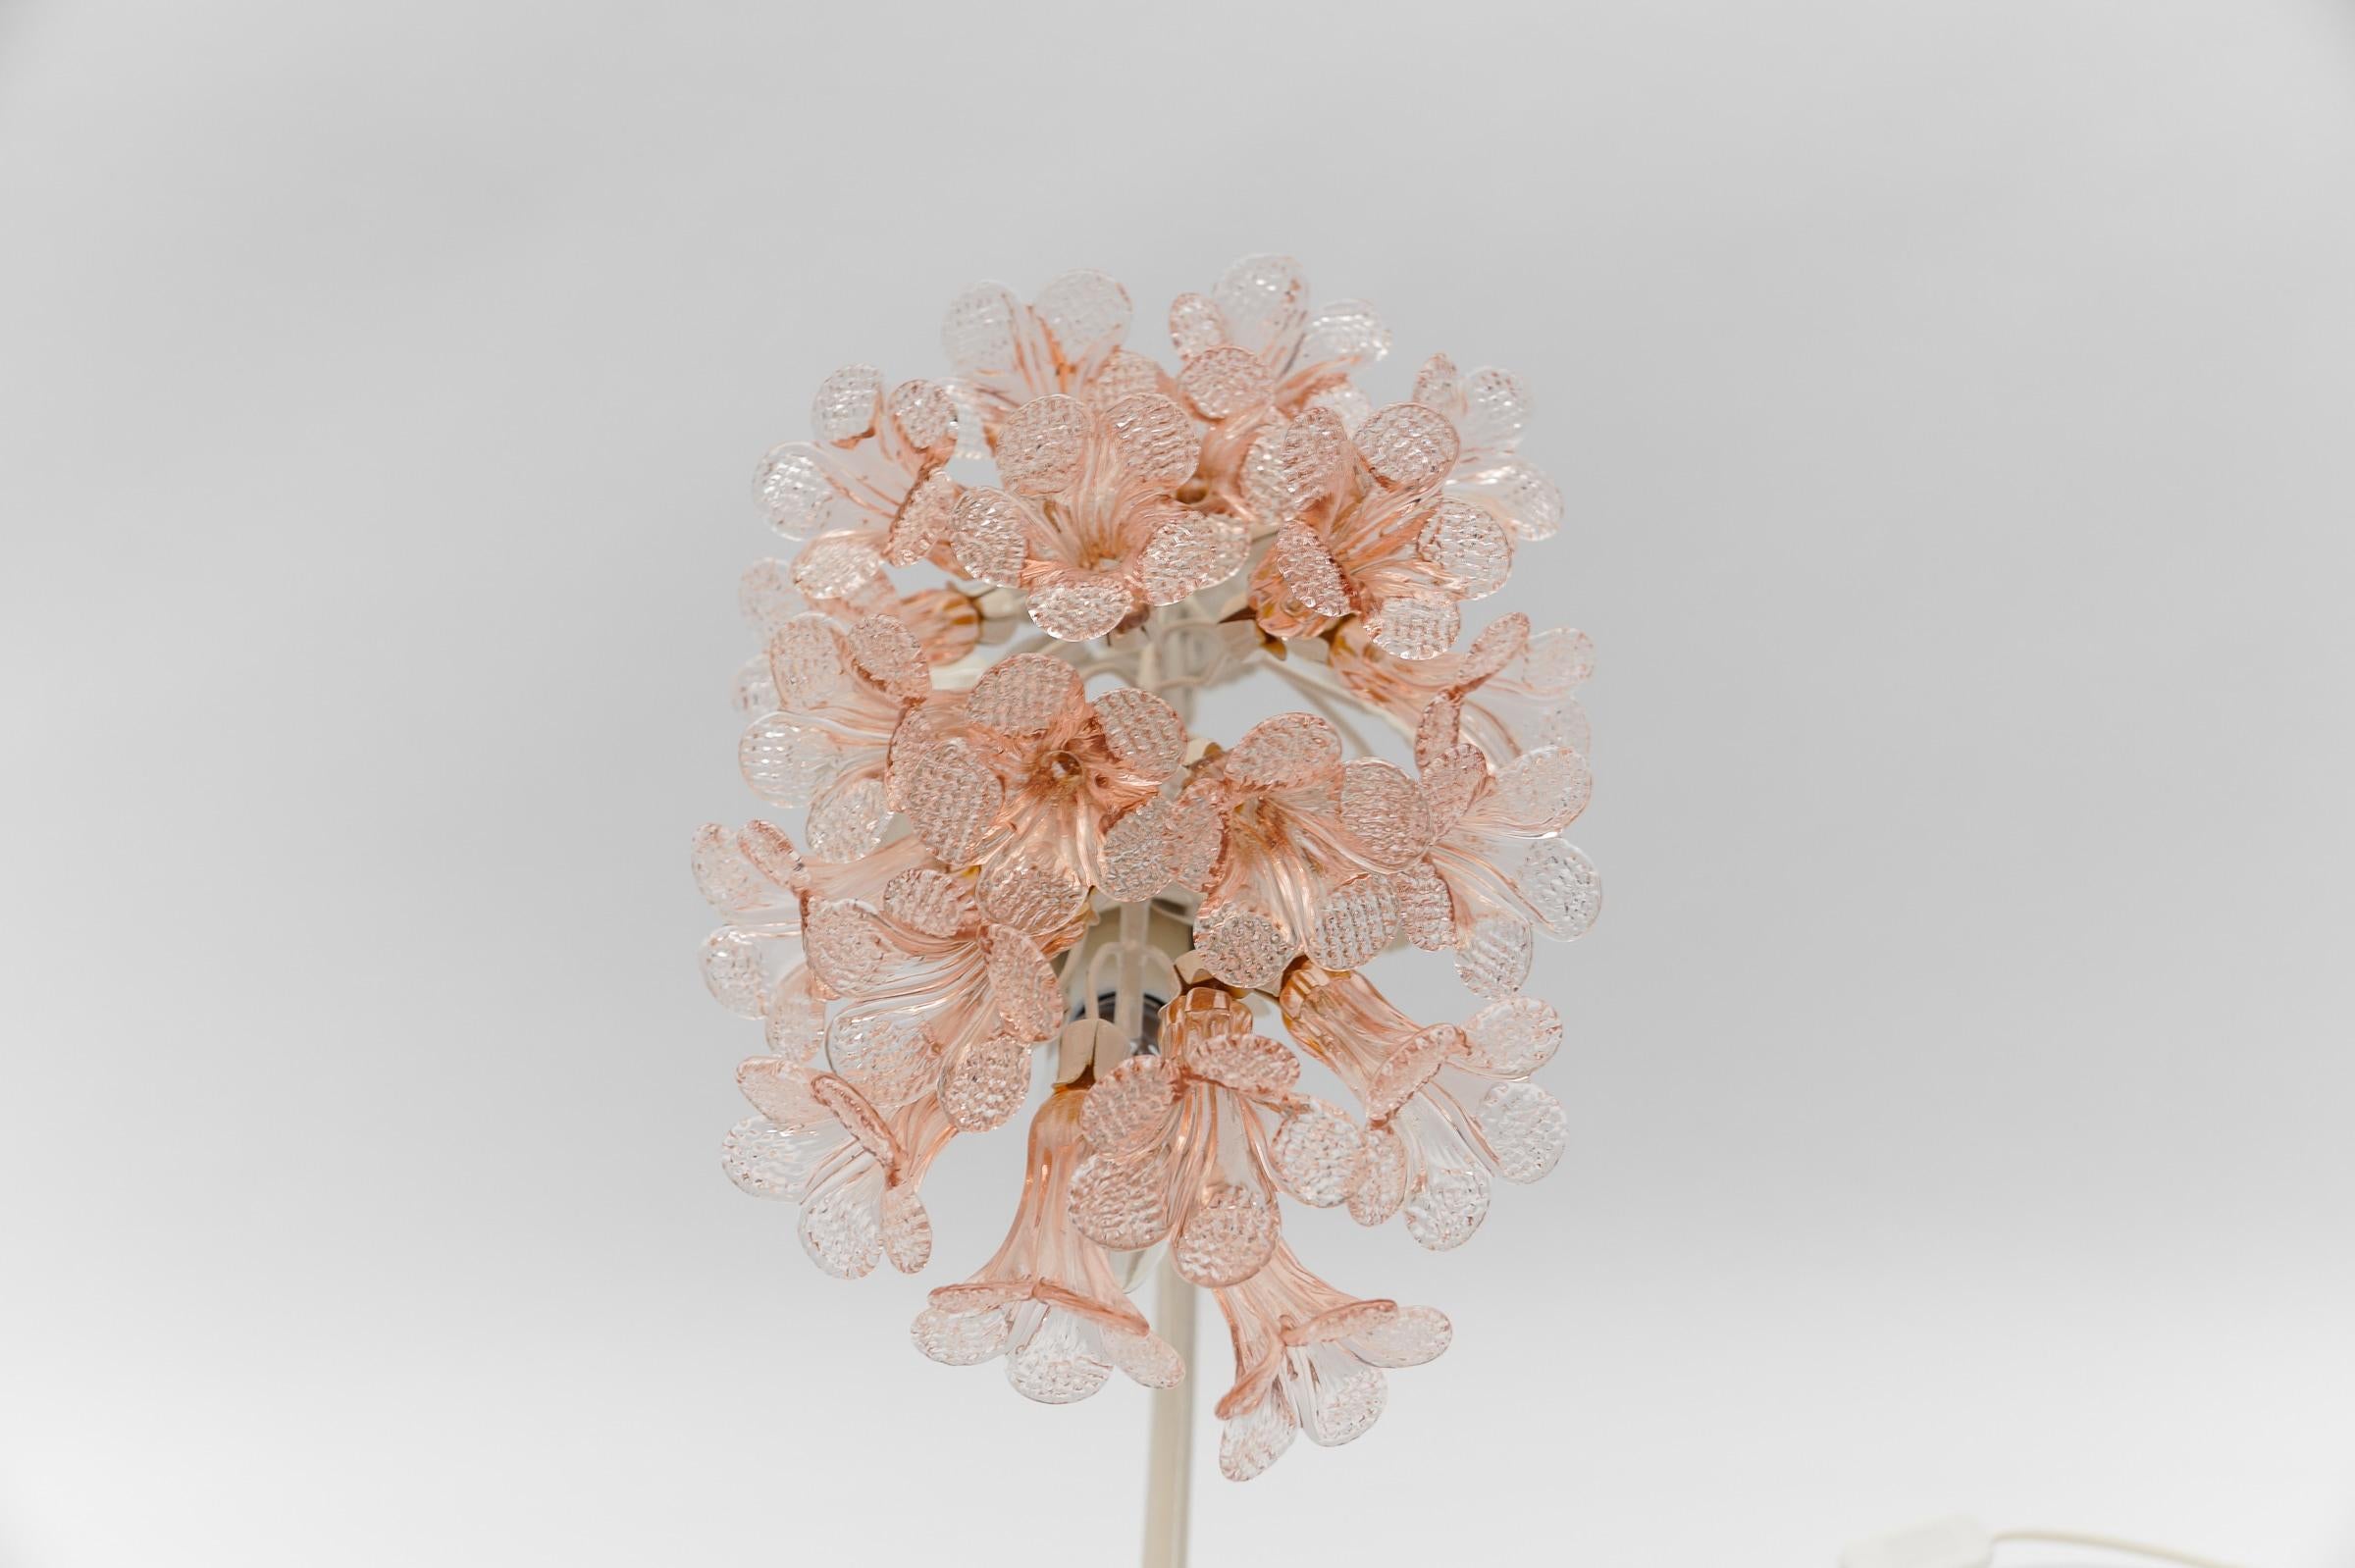 Italian Modern Table Lamp made in Pink Murano Glass Flowers, 1960s Italy For Sale 7